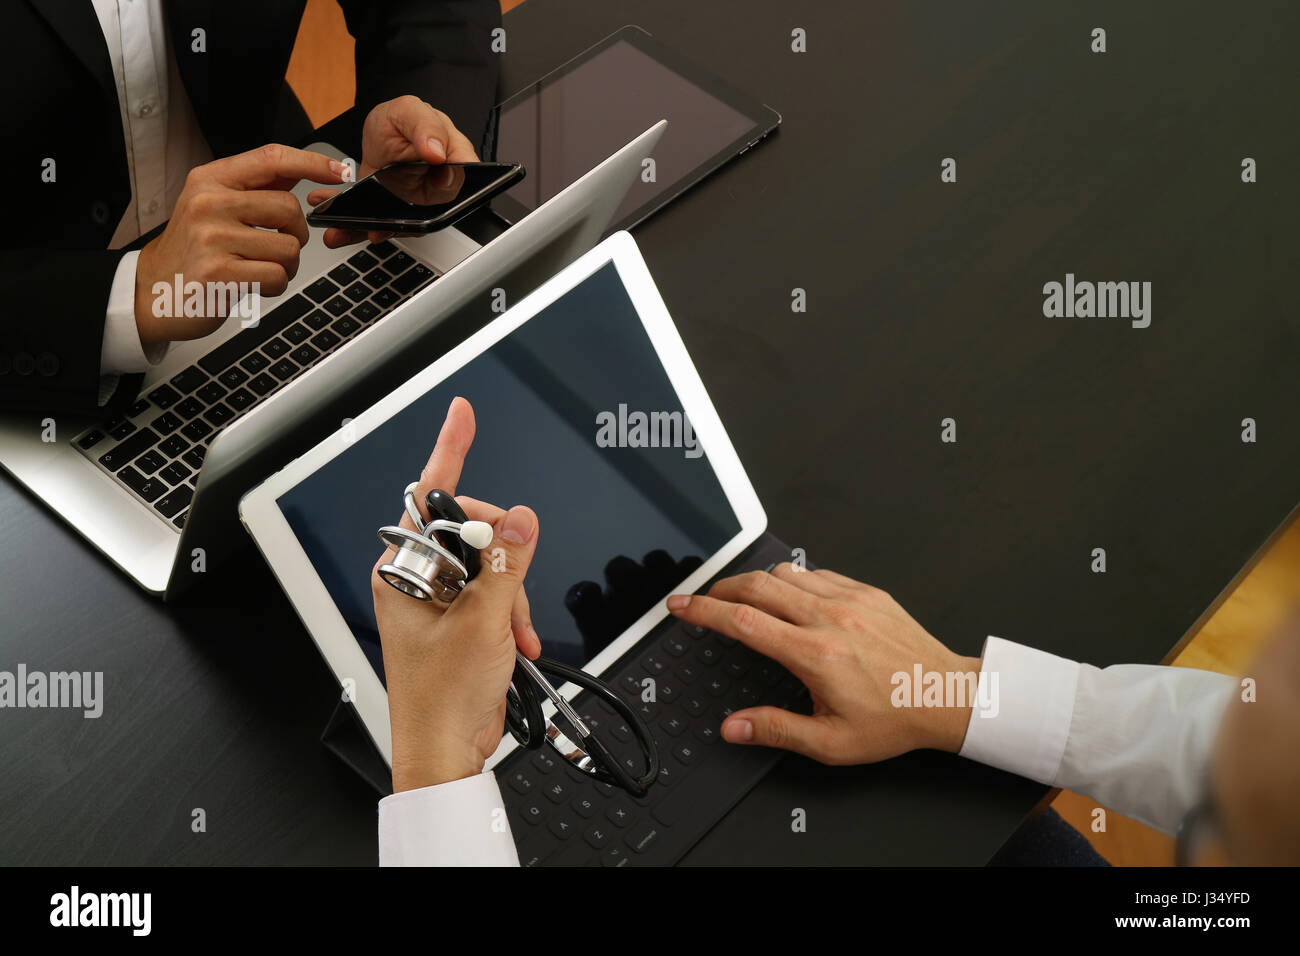 Medical co working concept,Doctor working with smart phone and digital tablet and laptop computer to meeting his team in modern office at hospital Stock Photo